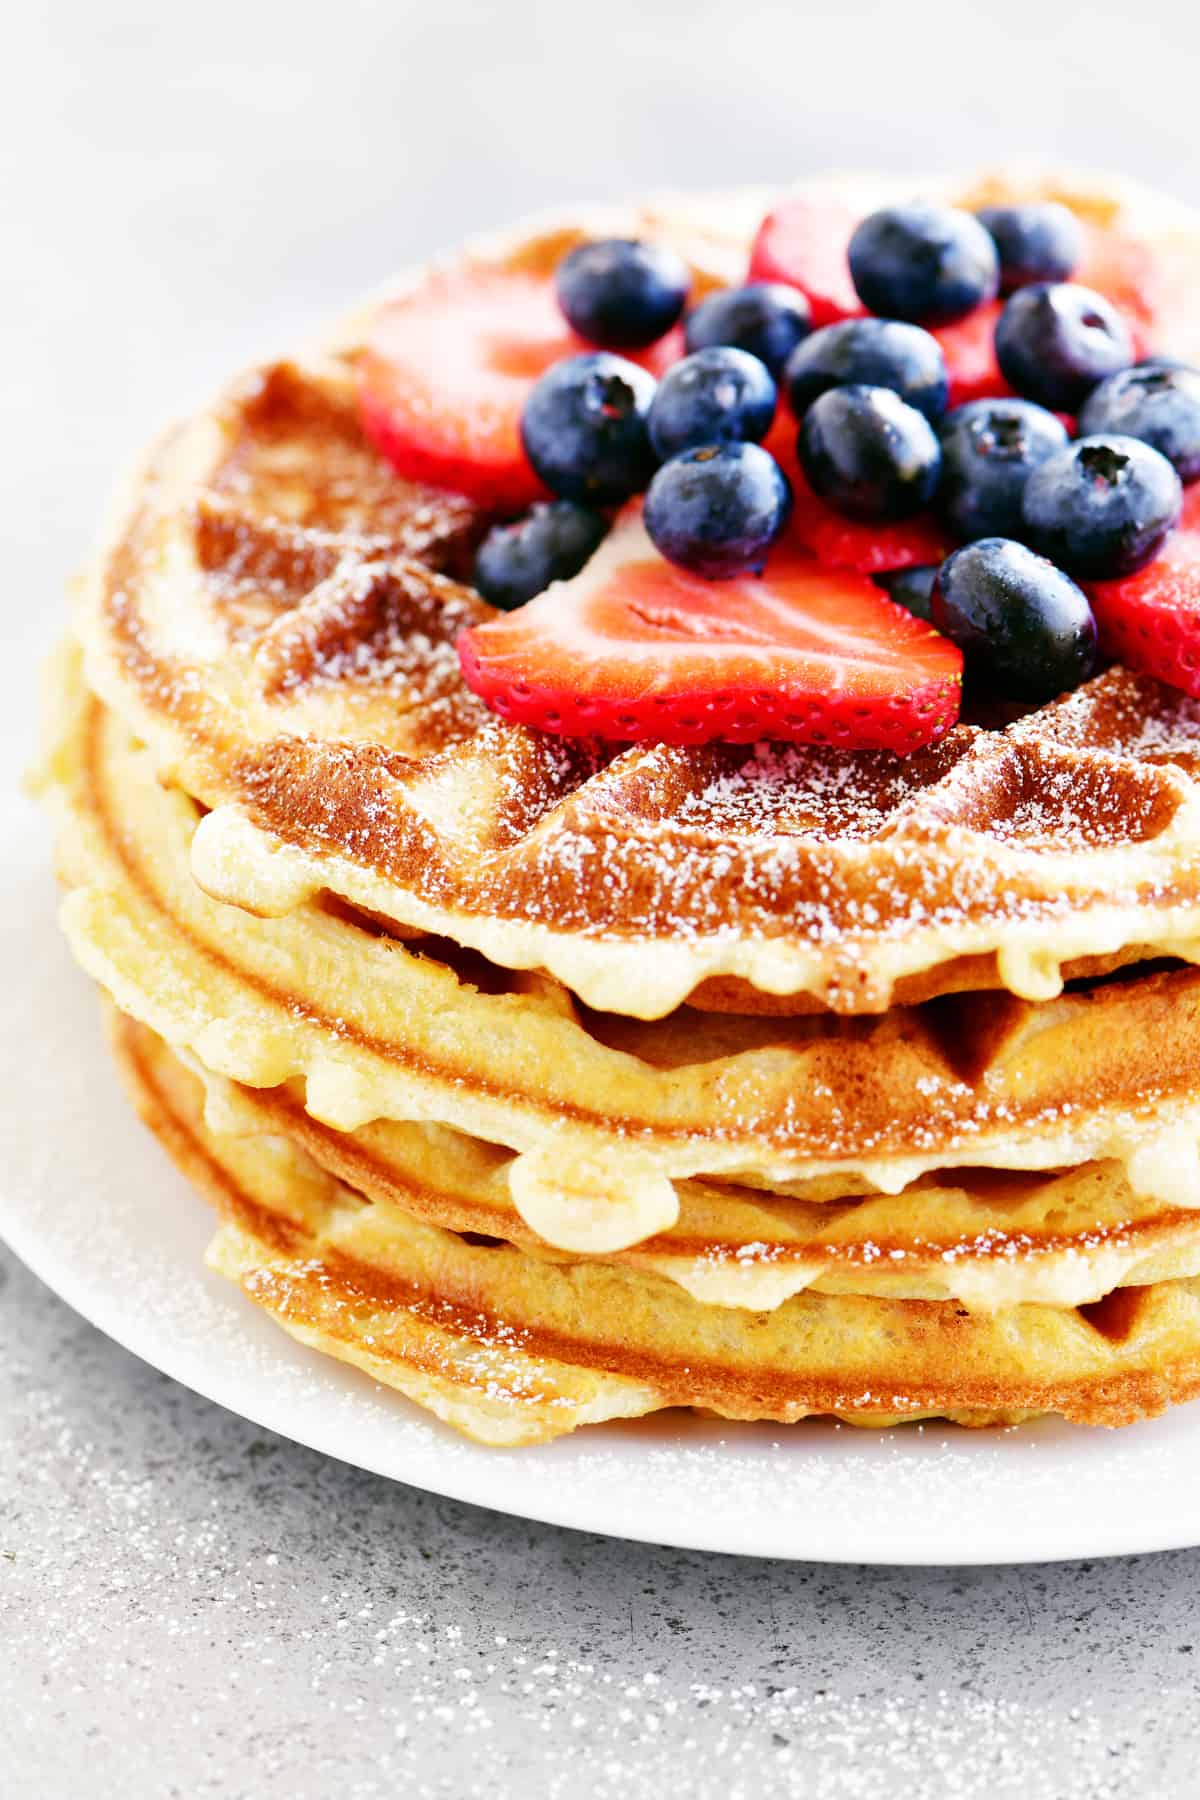 This Bisquick Waffles recipe is a great way to start the day! Top them with butter and syrup or fresh fruit and whipped cream.